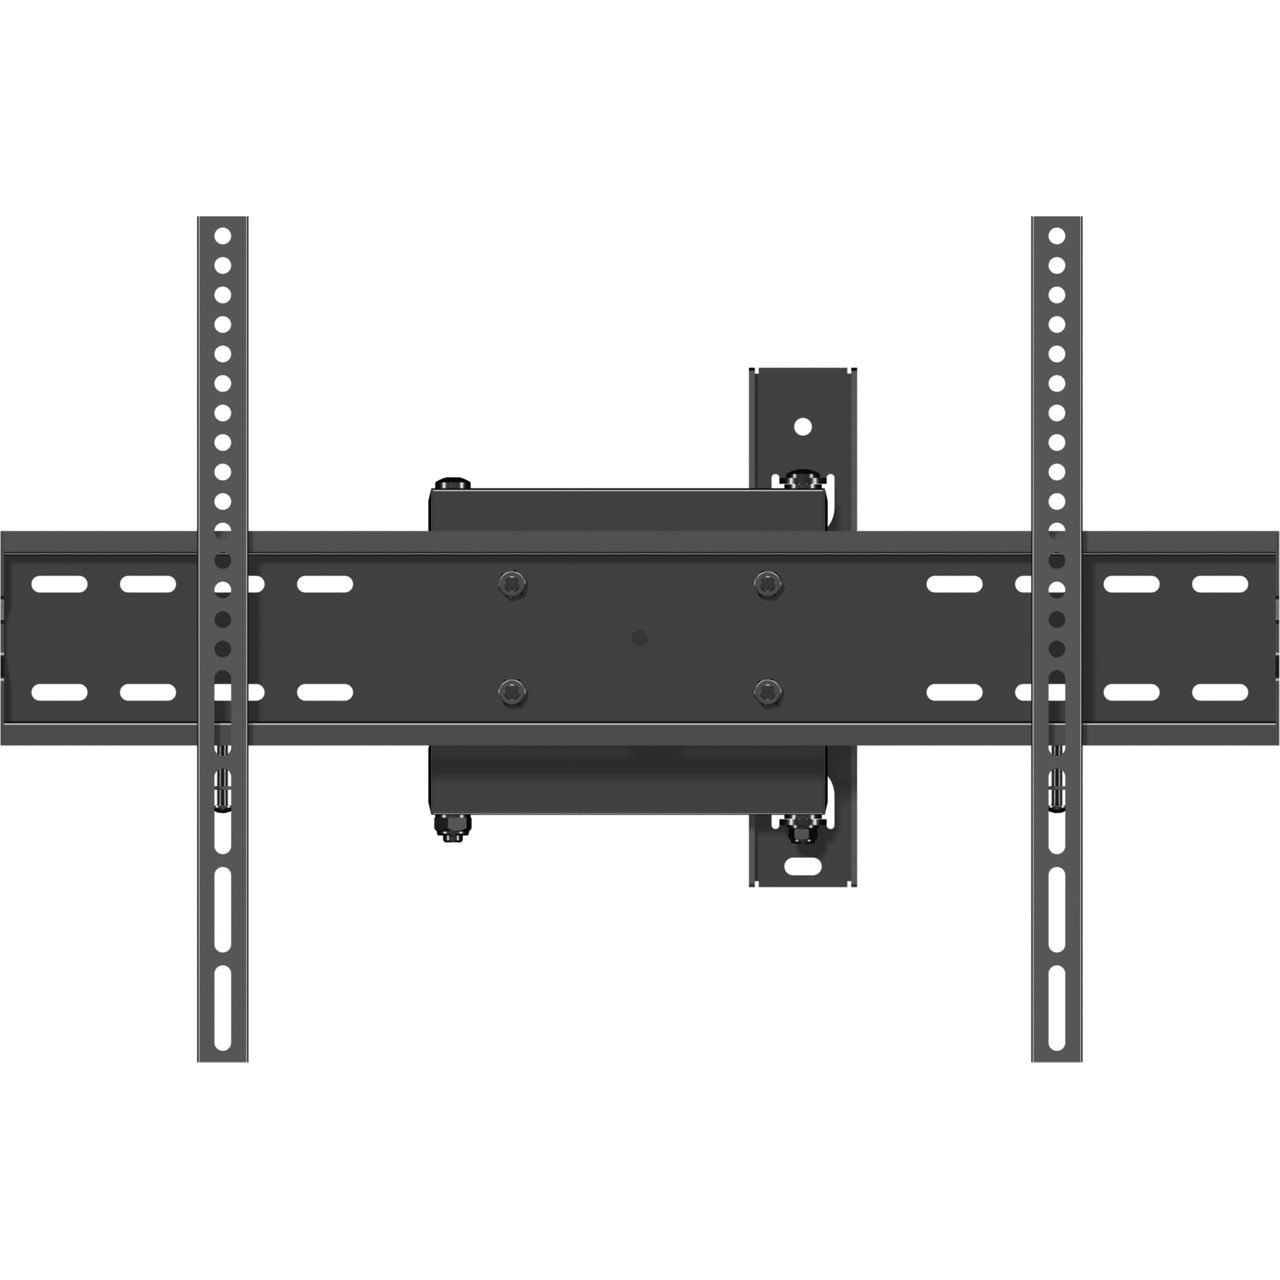 Secura QLF314-B2 Full Motion TV Wall Bracket For 40 to 70 inch TV's Review